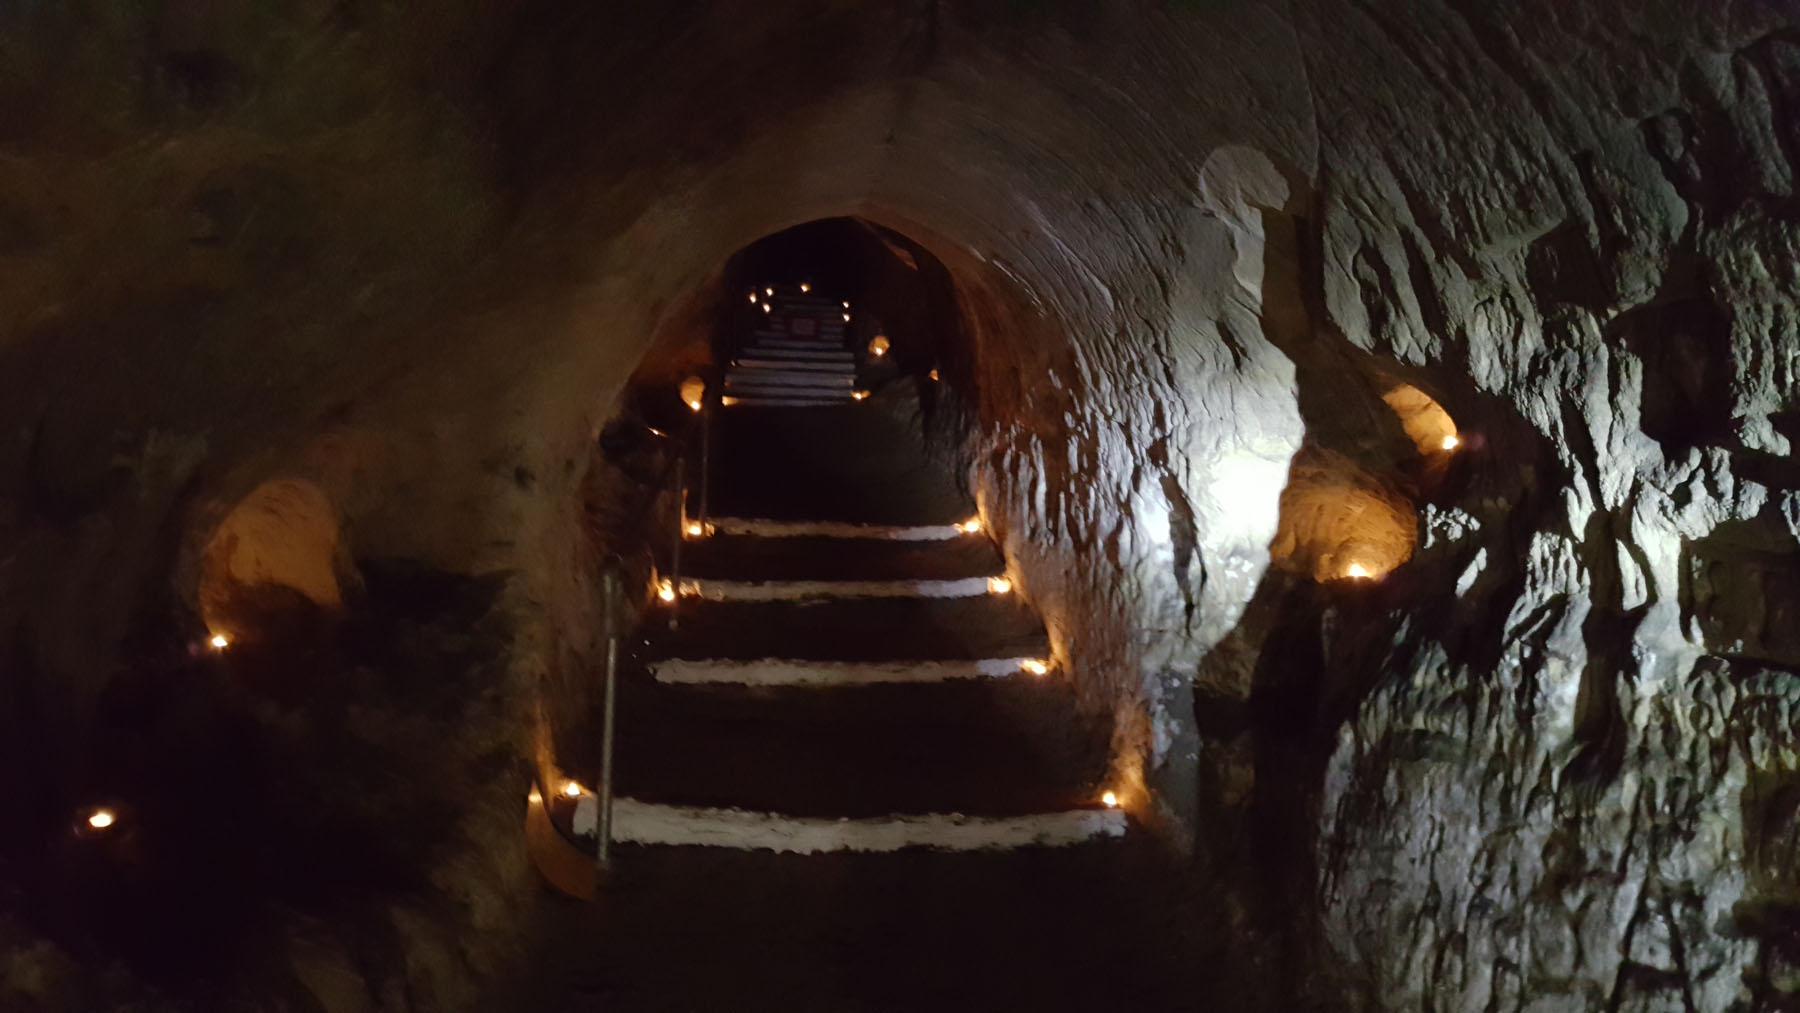 Tickets Alert: Reigate Caves tickets now available